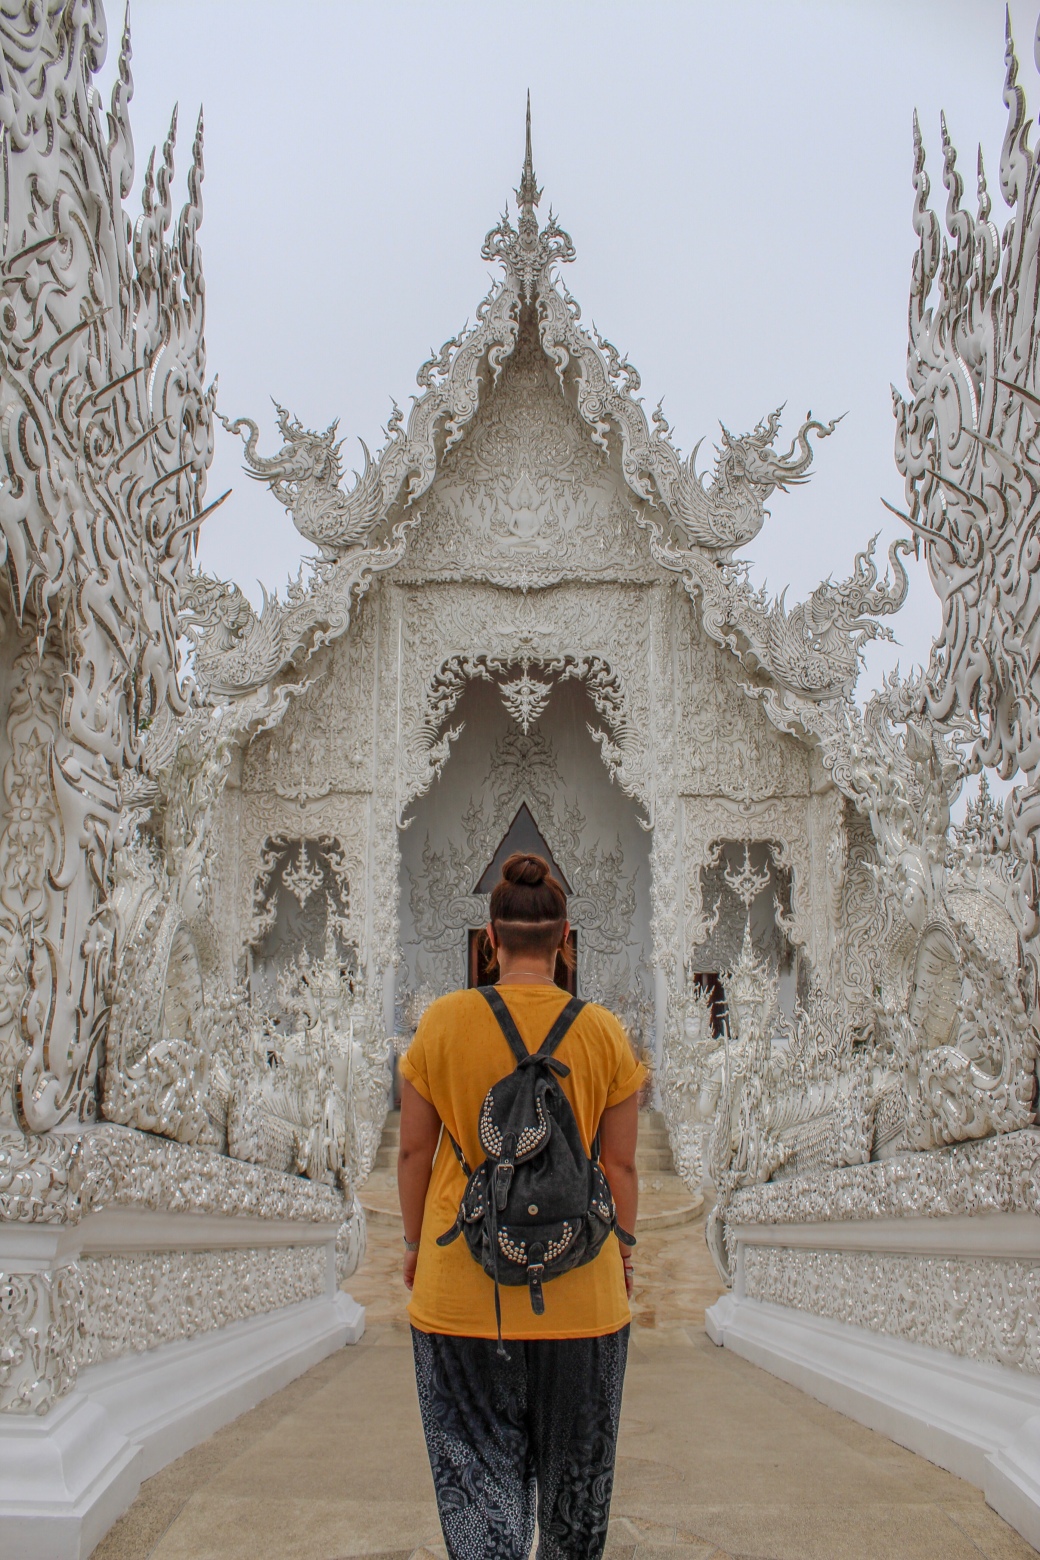 Steff walking across the bridge to enter The White Temple (Wat Rong Khun) in Chiang Rai, Northern Thailand